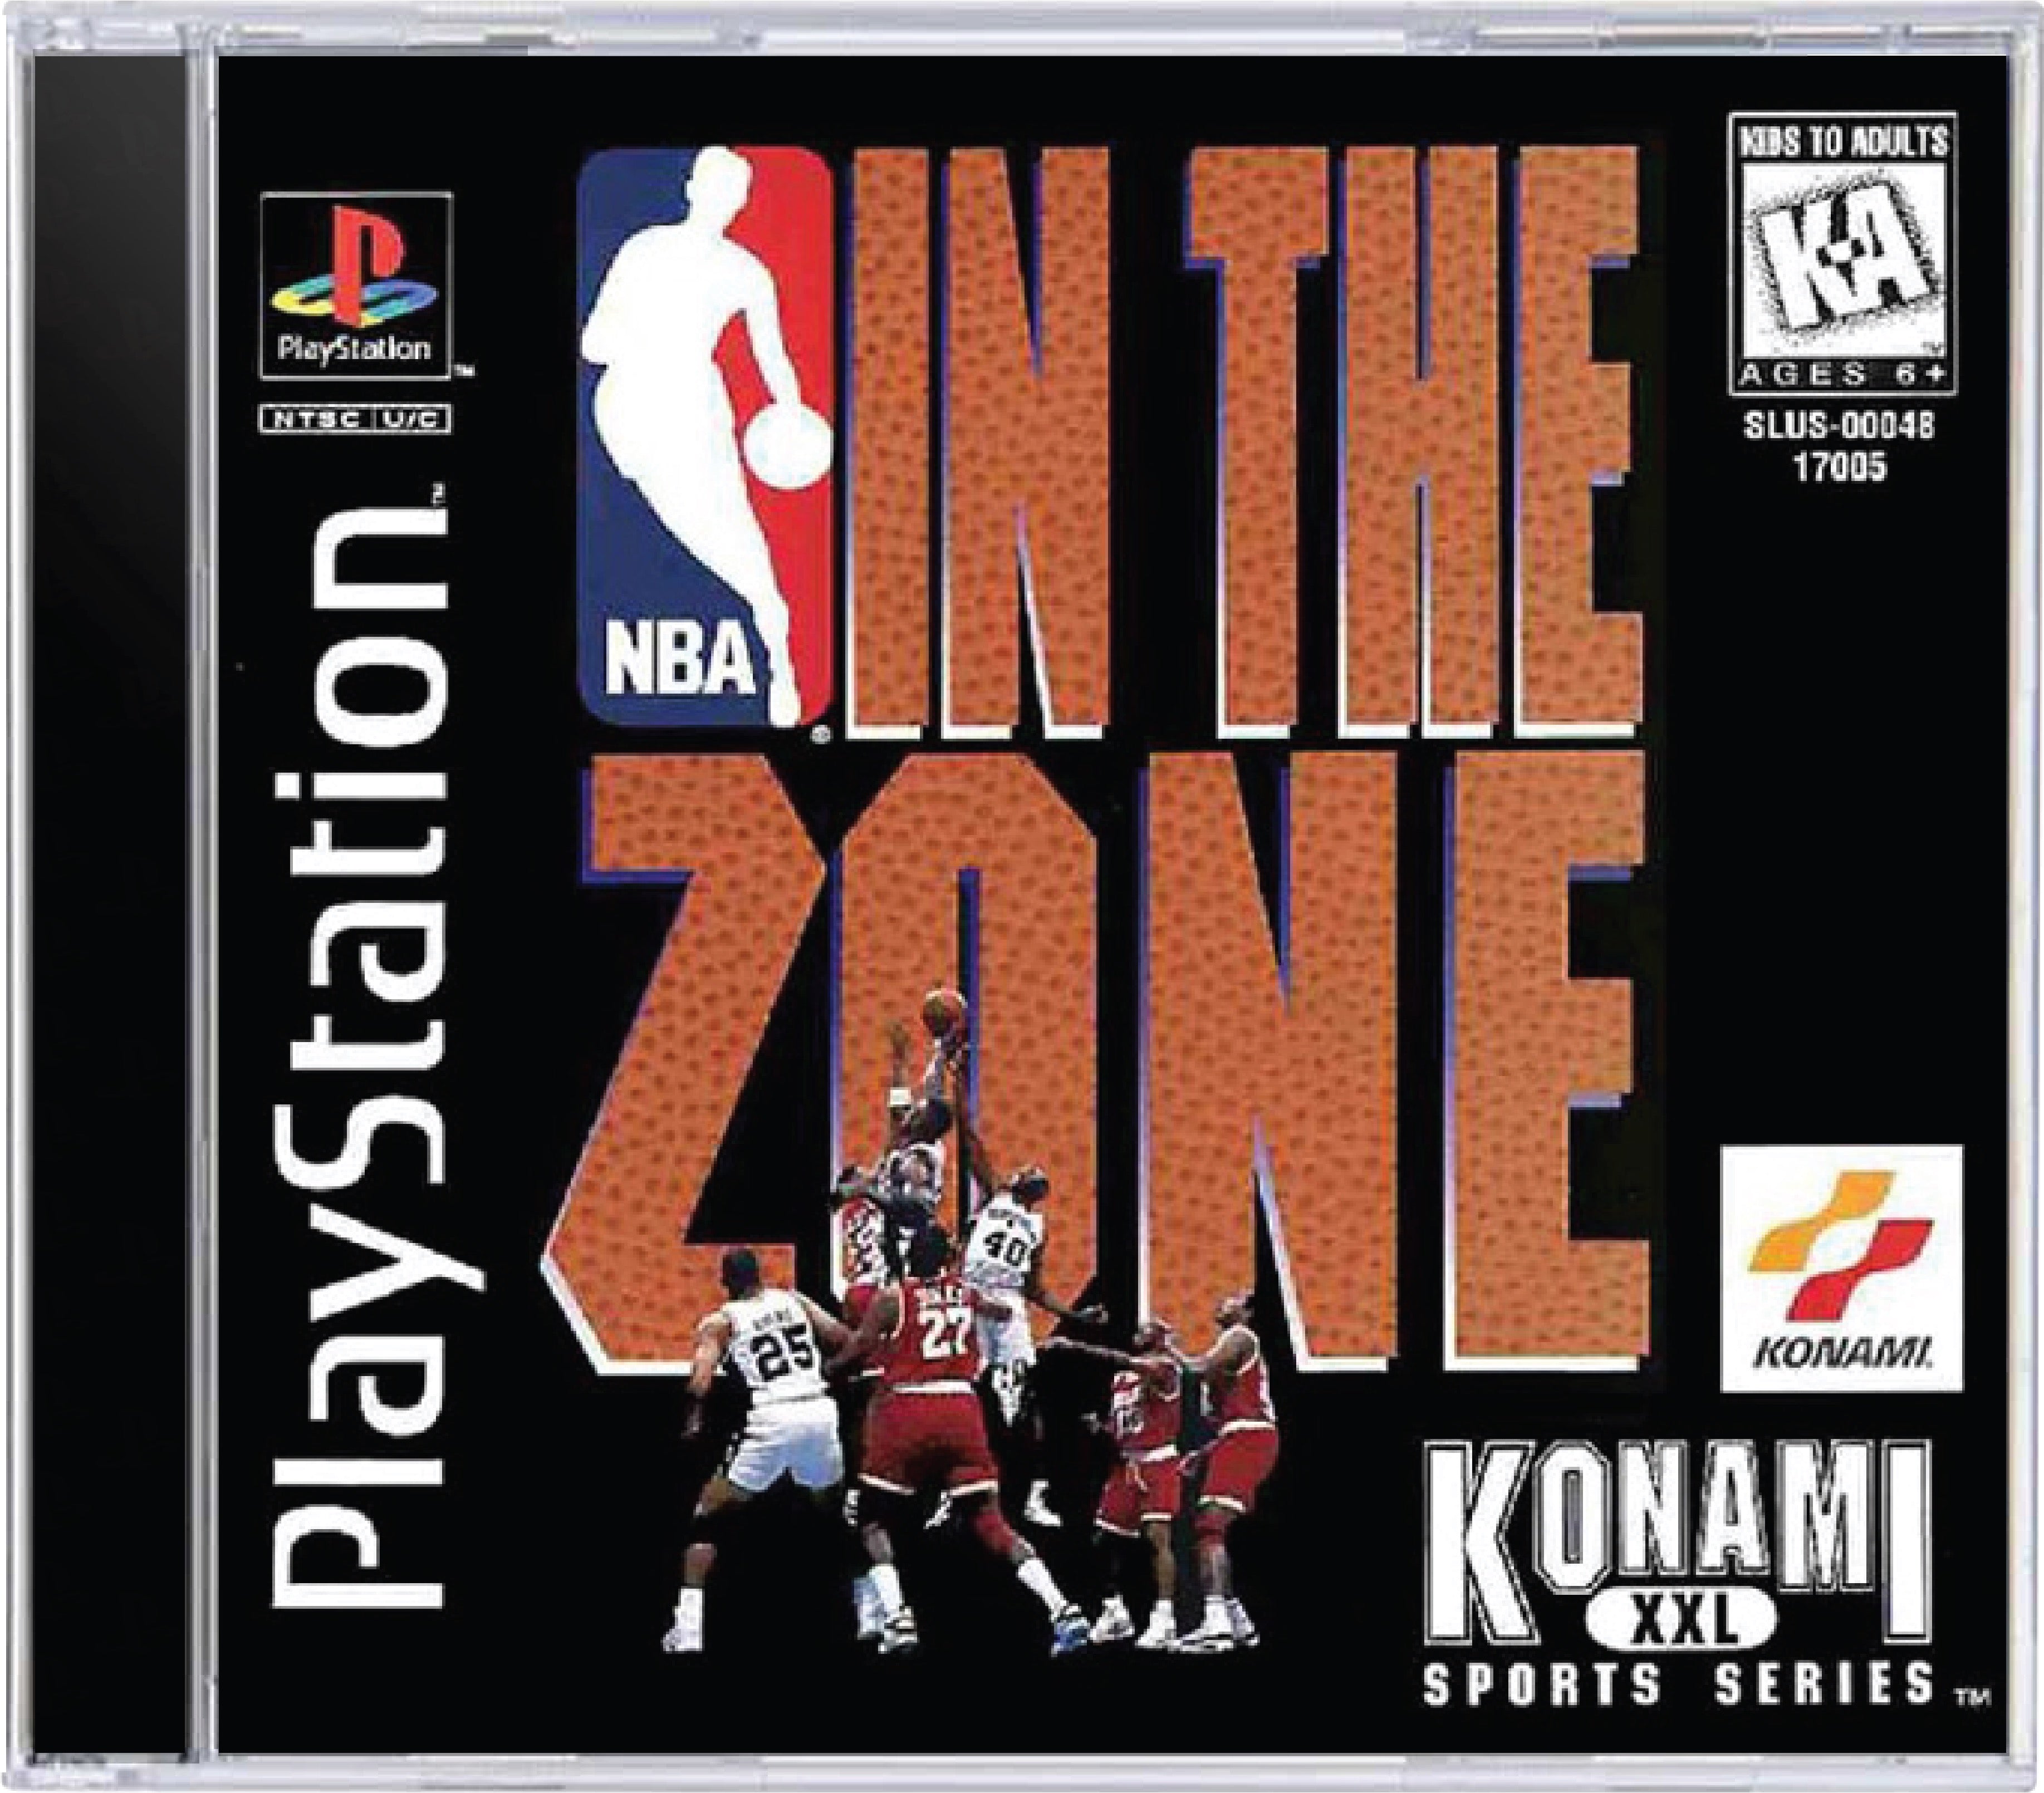 NBA in the Zone Cover Art and Product Photo